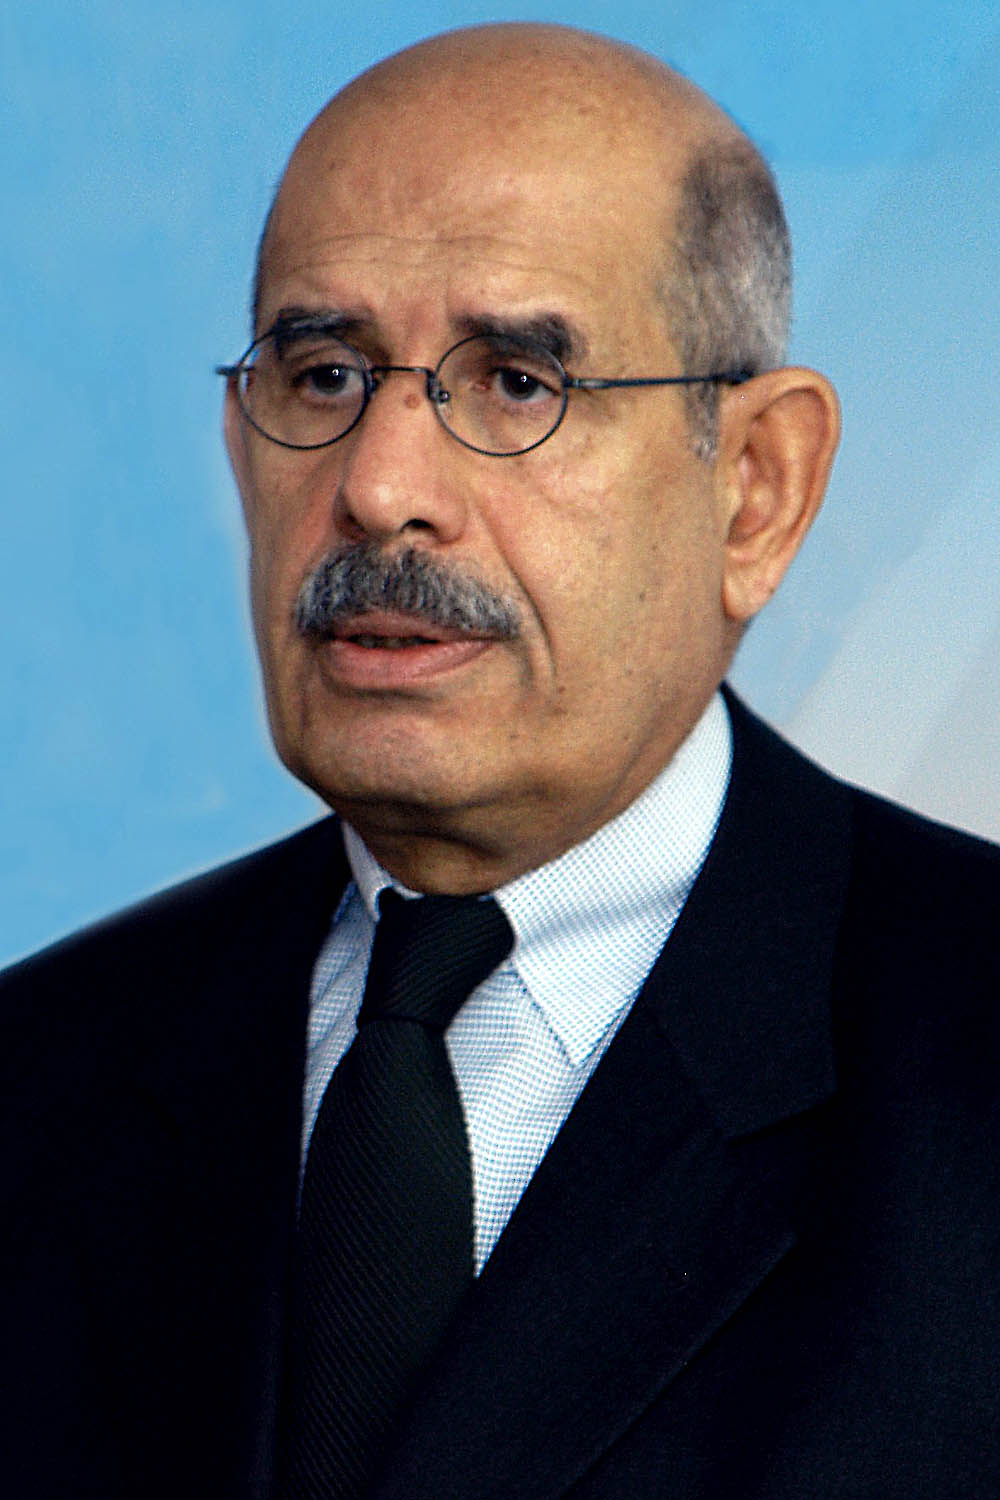 Mohamed ElBaradei's quote #8